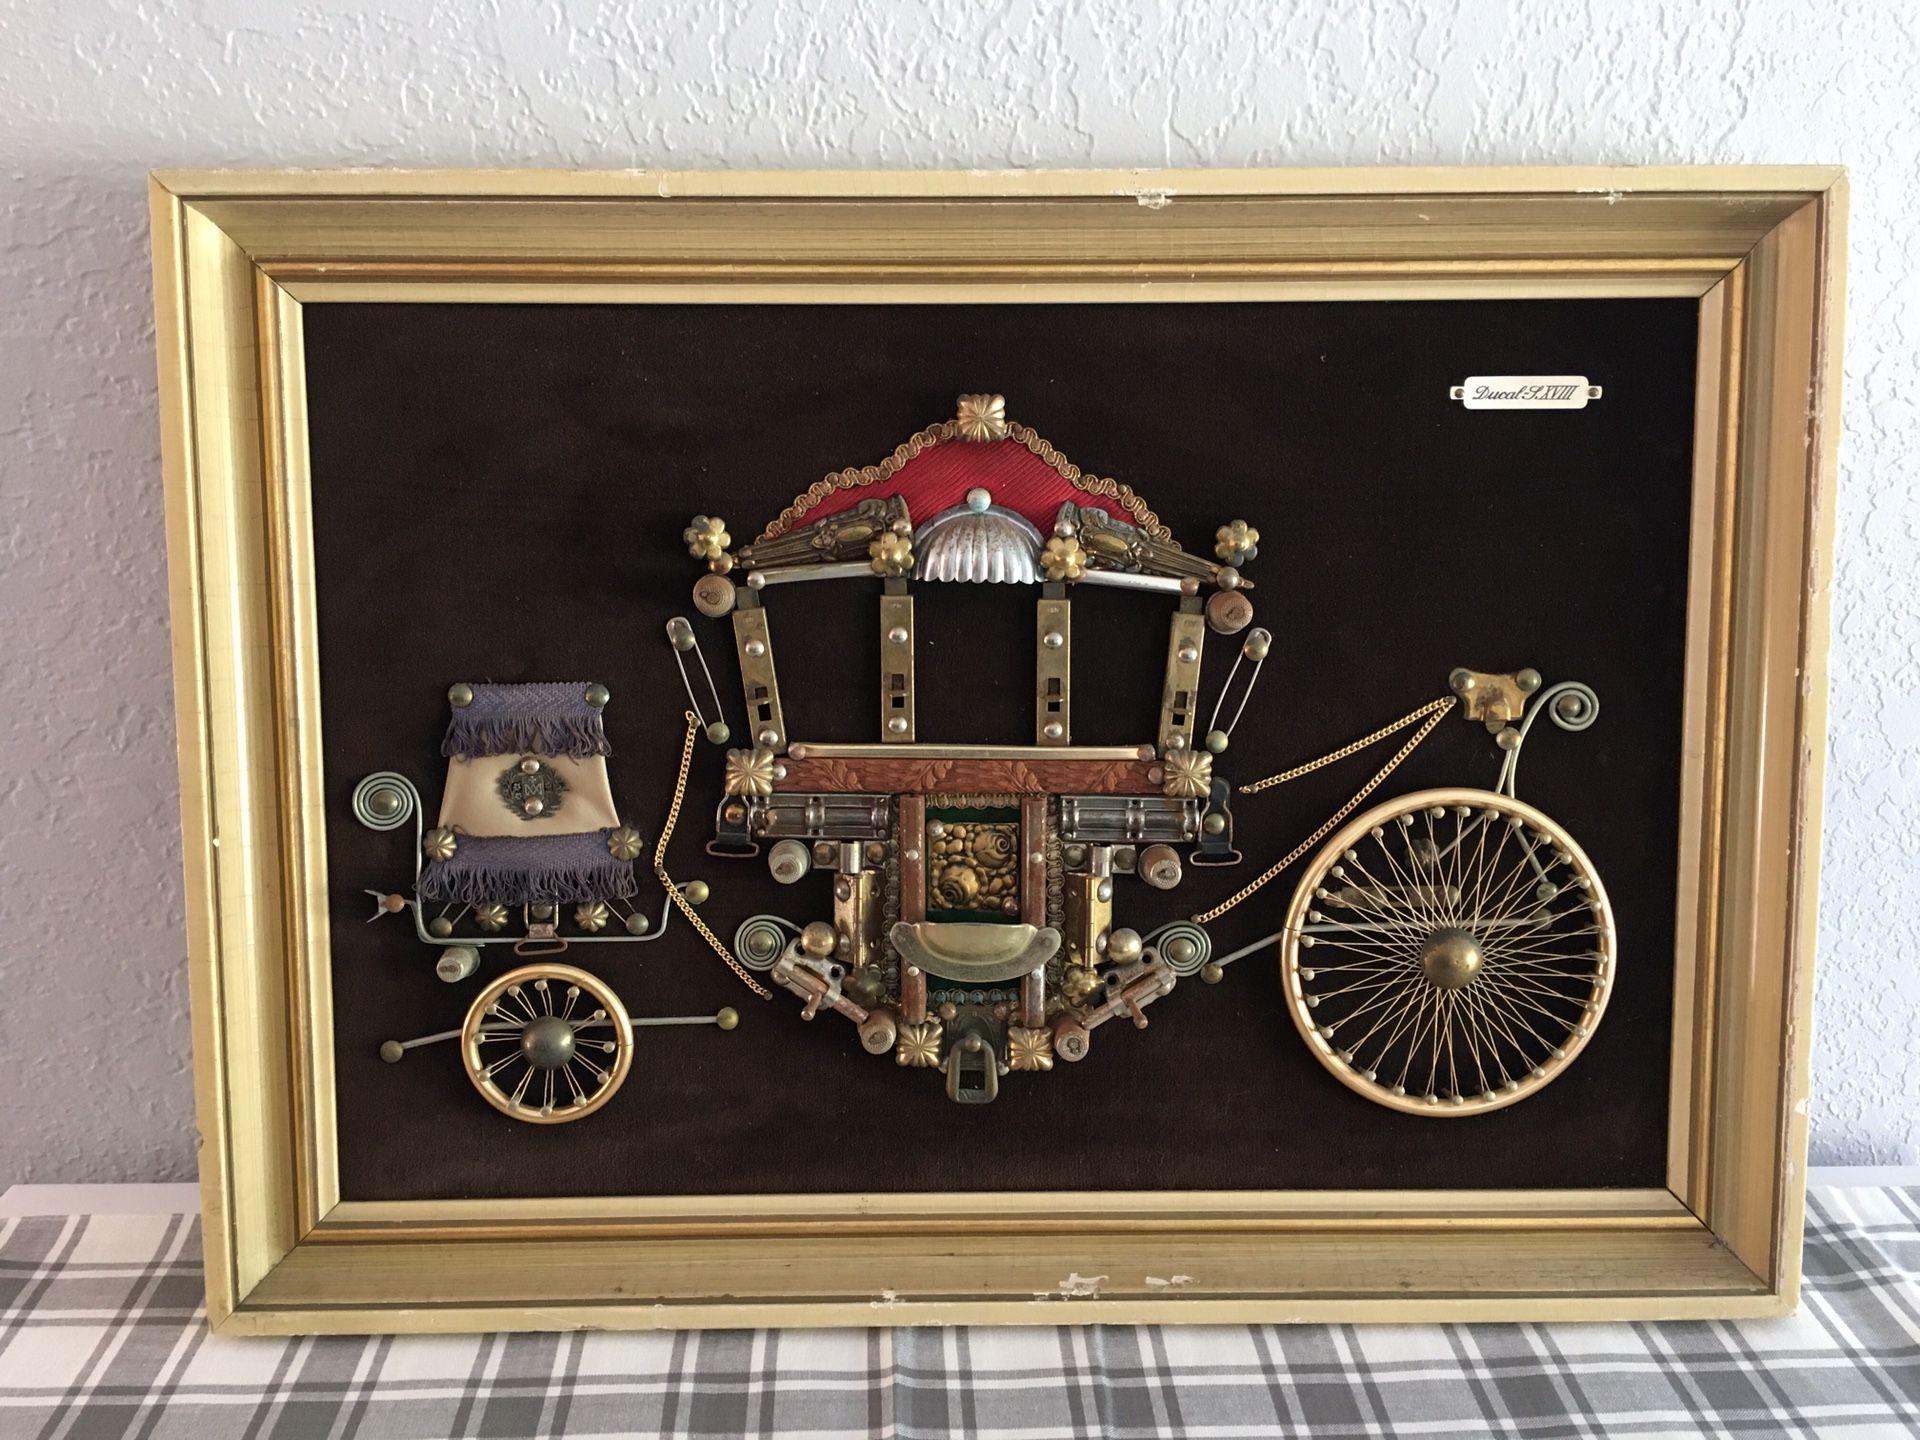 Artwork - junk art. Made with found items